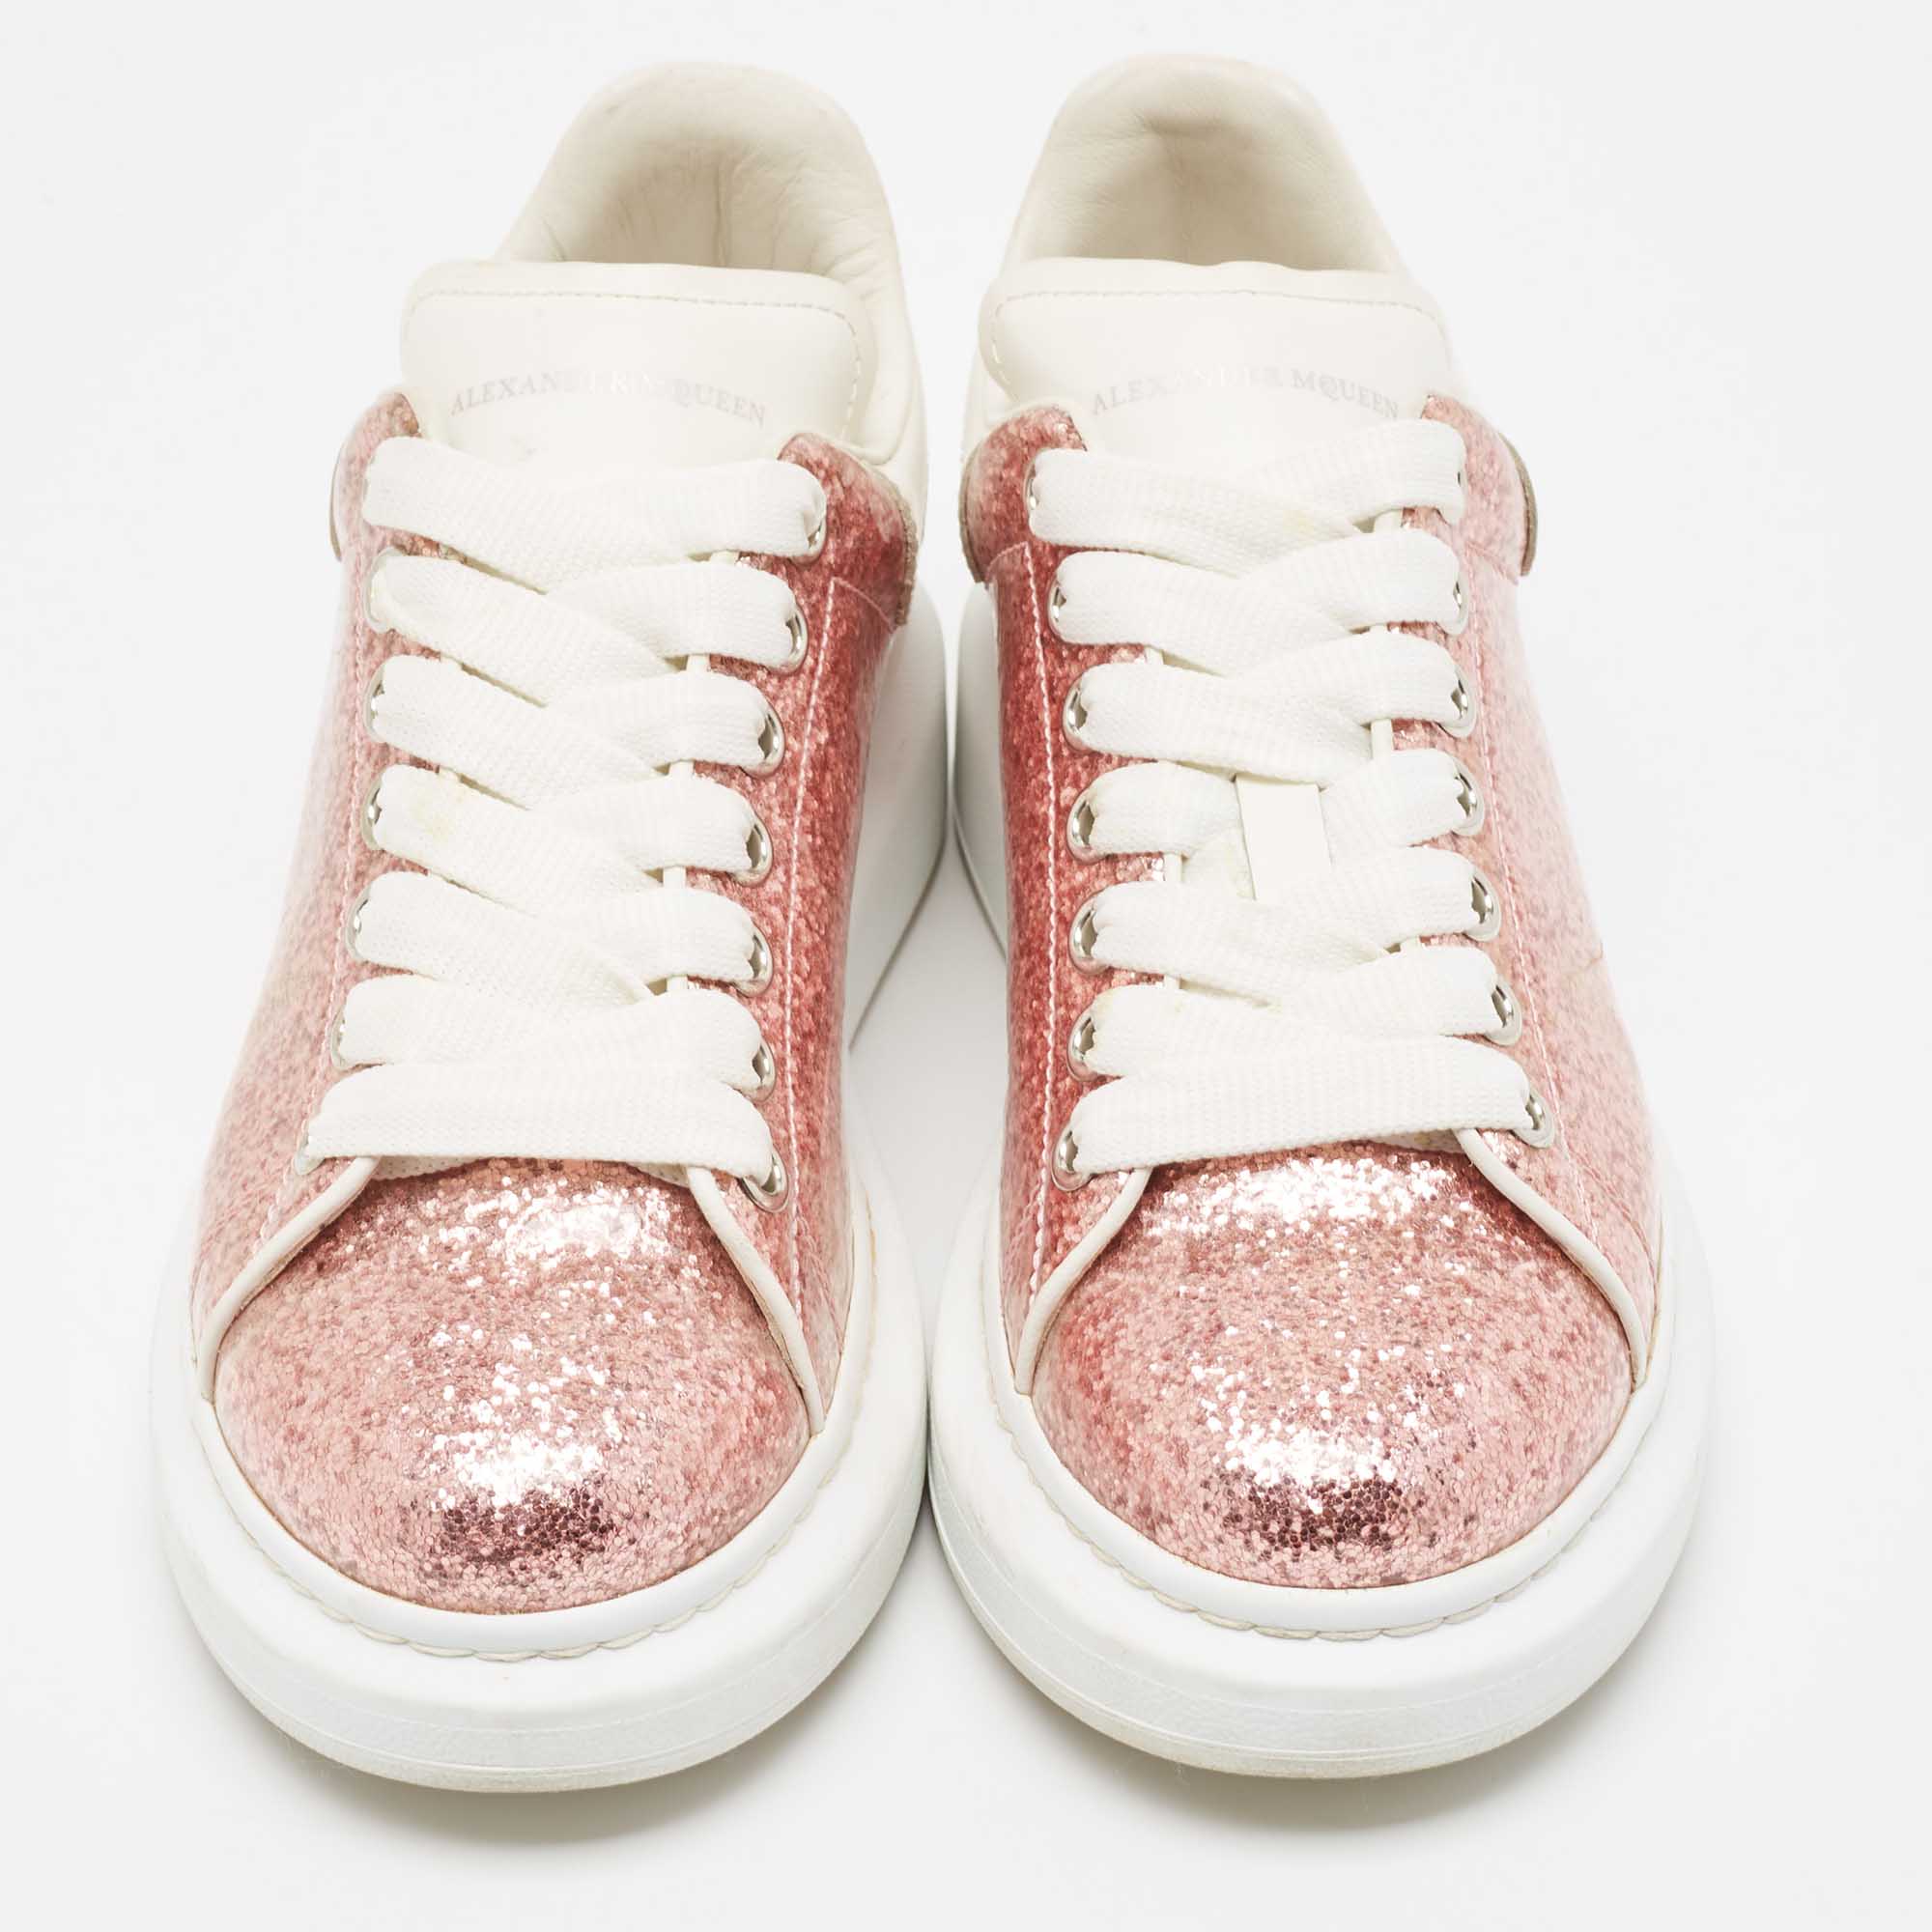 Alexander McQueen Metallic PVC And Leather Oversized Low Top Sneakers Size 38.5